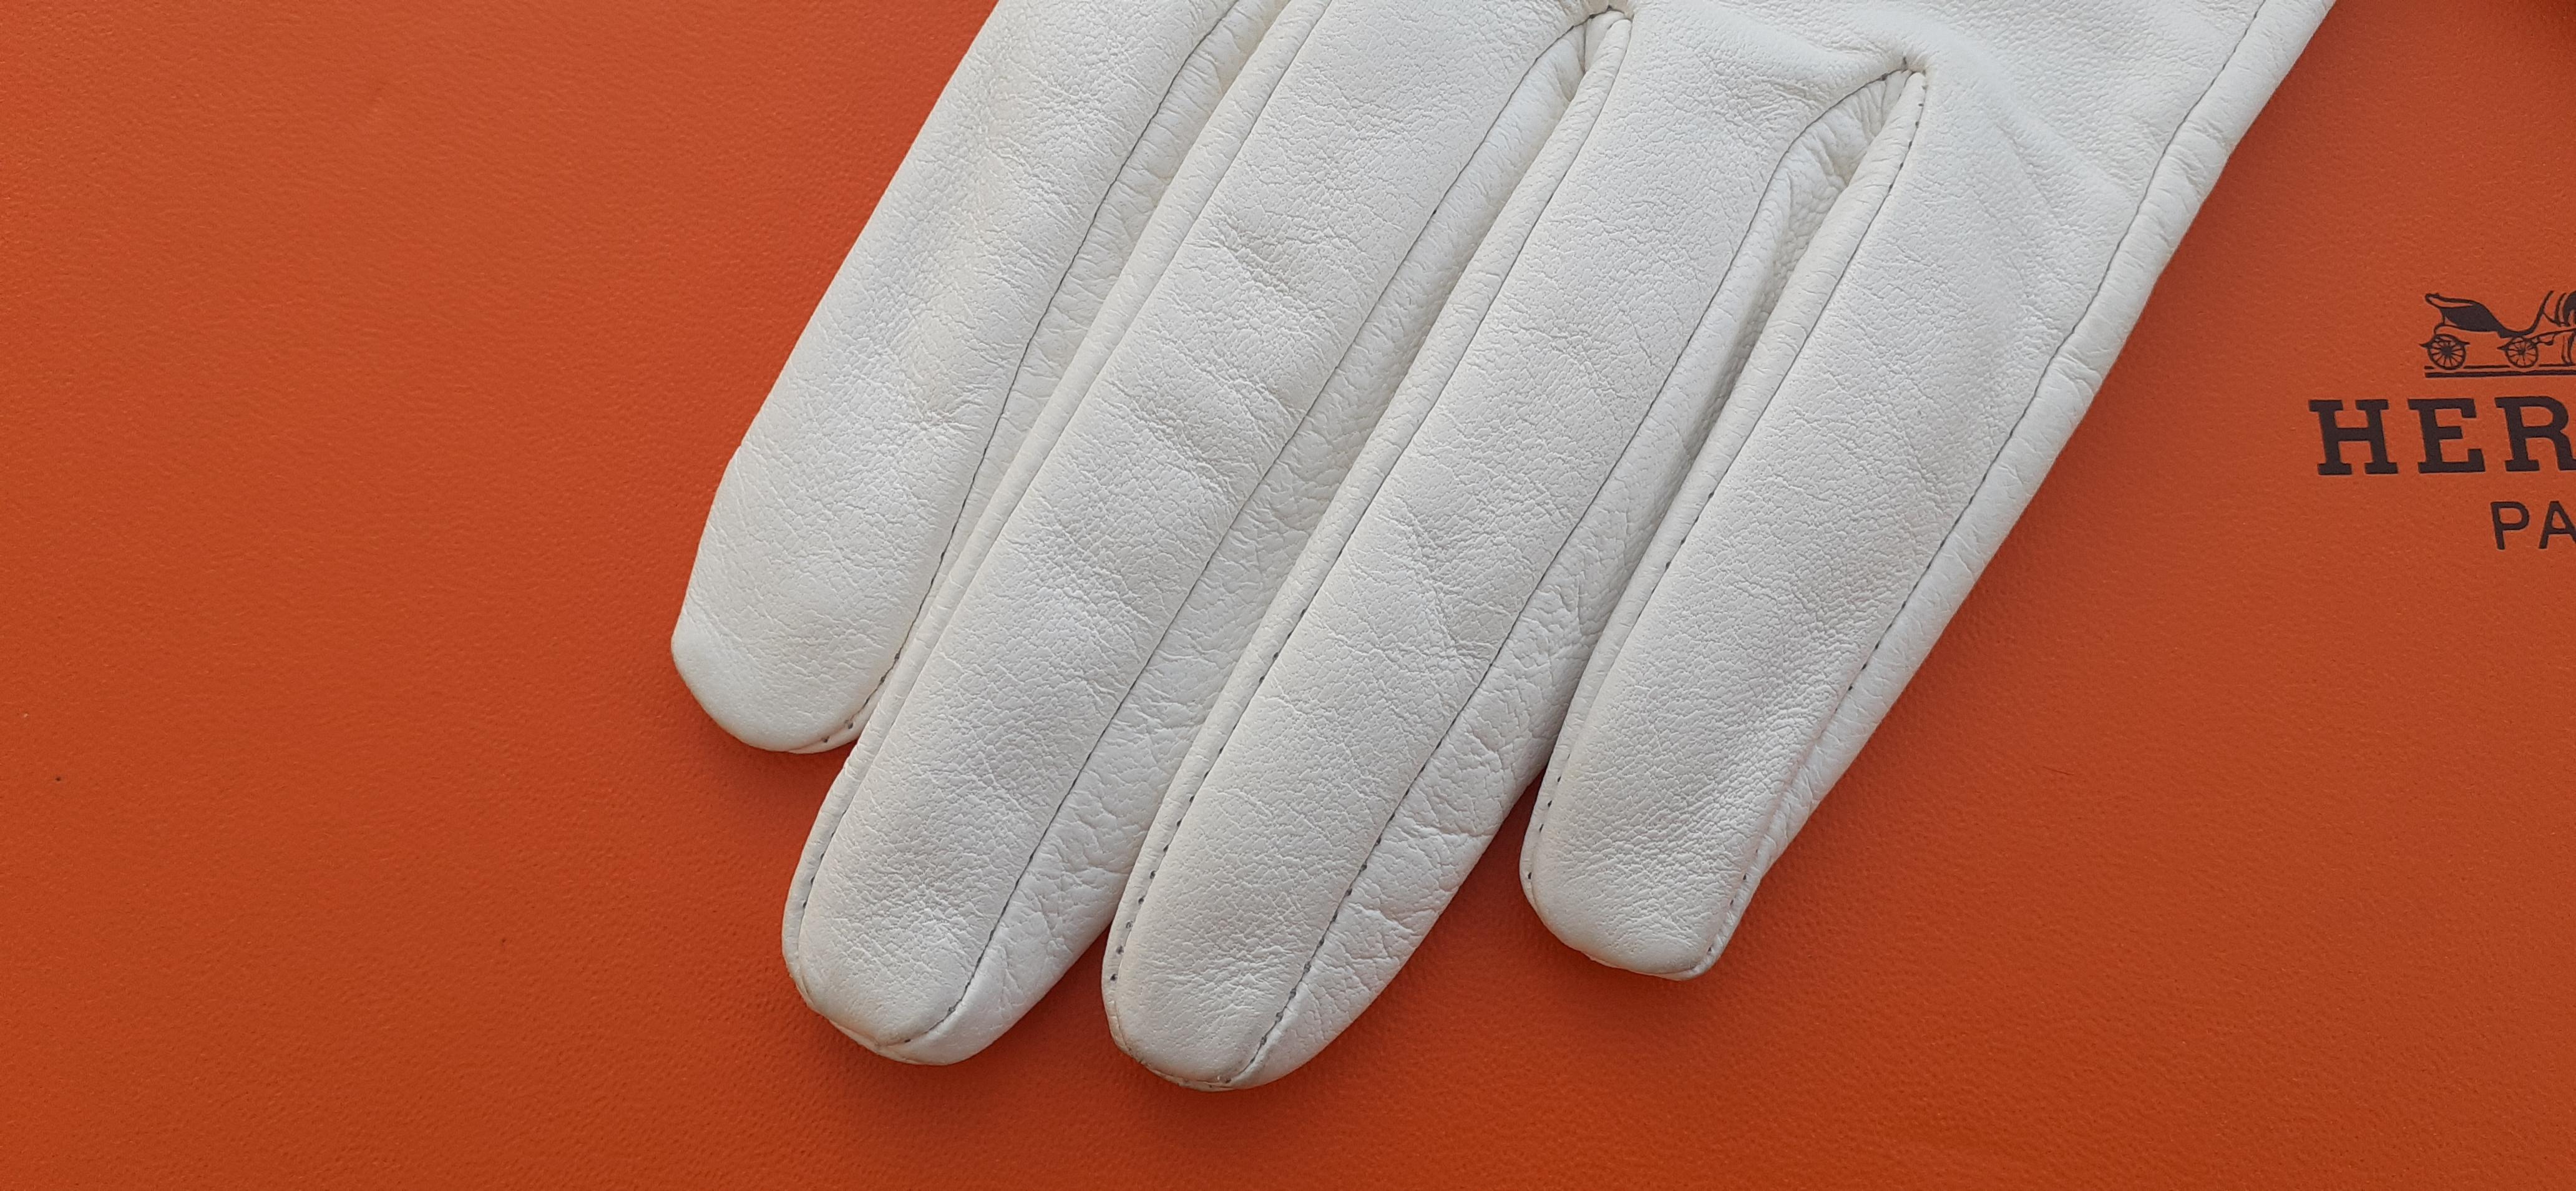 Gray Lovely Hermès White Leather and Silk Gloves Ghillies Size 6.5 For Sale